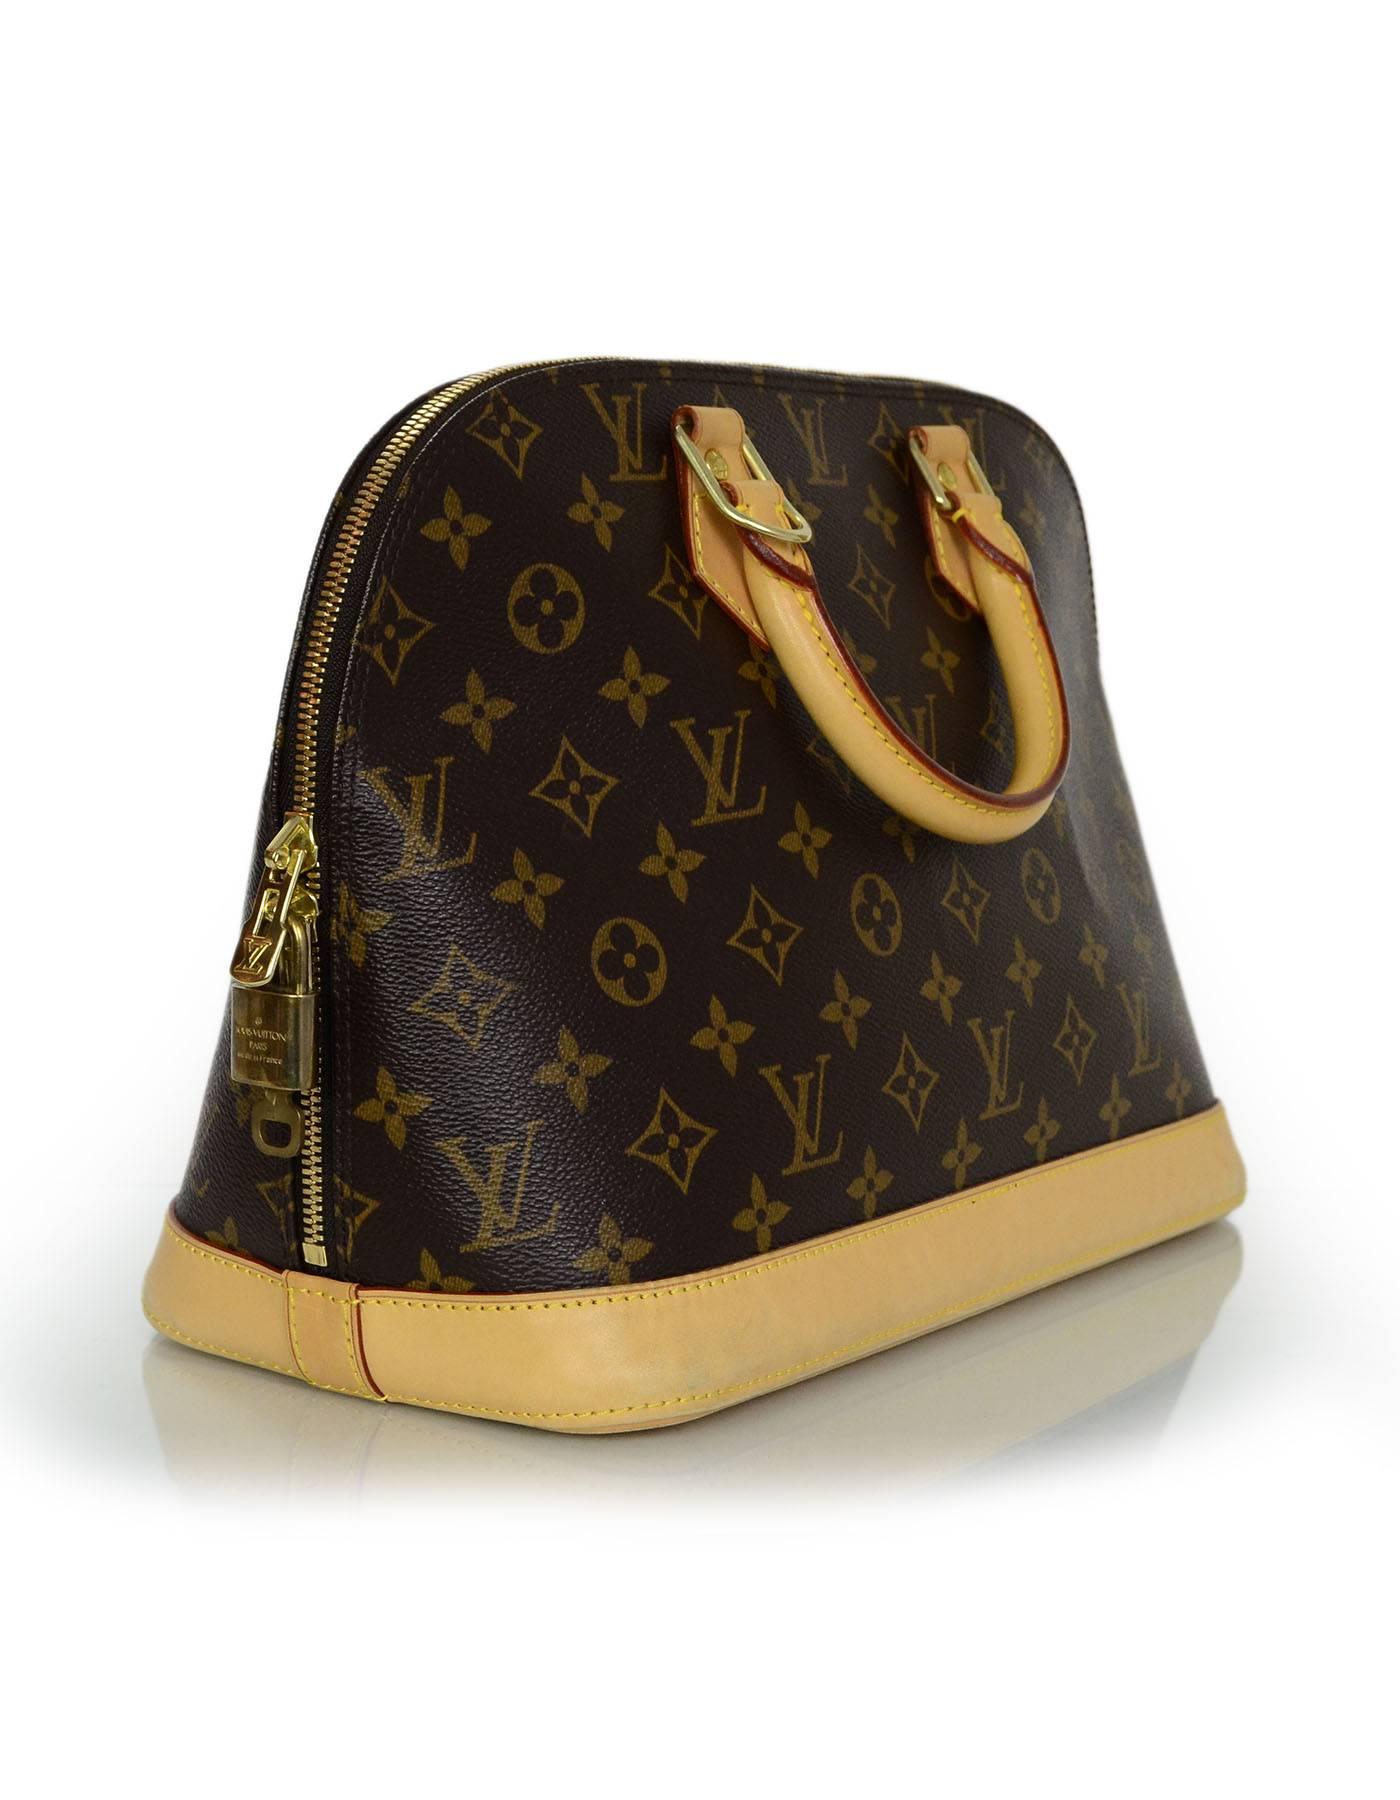 Louis Vuitton Monogram Alma PM Bag
Features tan leather trim throughout exterior

Made In: France
Year of Production: 2006
Color: Brown and tan
Hardware: Goldtone
Materials: Canvas, leather
Lining: Brown textile
Closure/Opening: Double zip